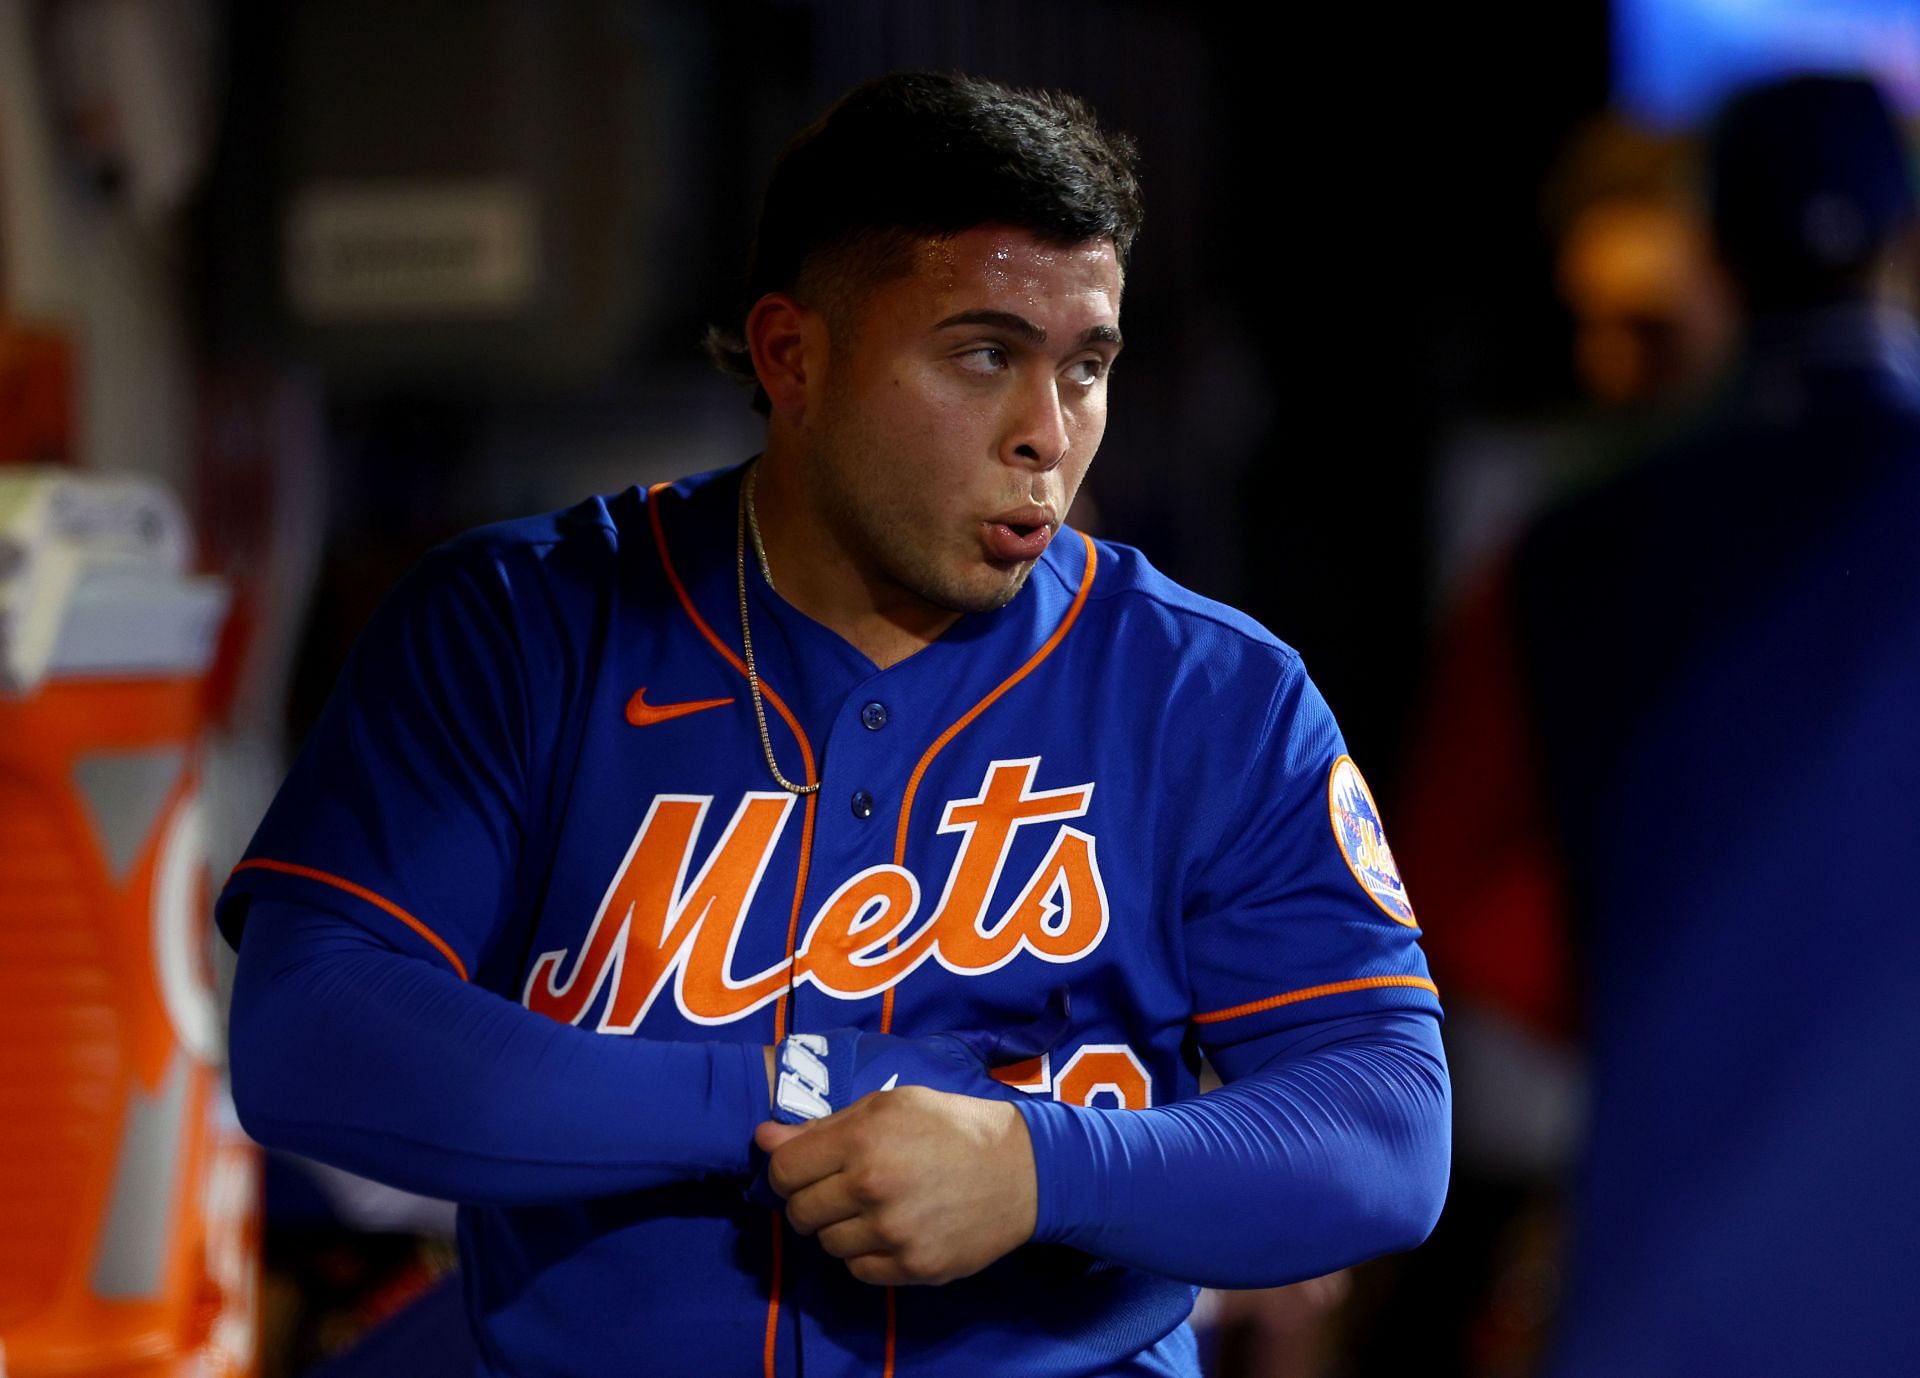 Francisco Alvarez of the New York Mets reacts in the dugout after hitting a home run.